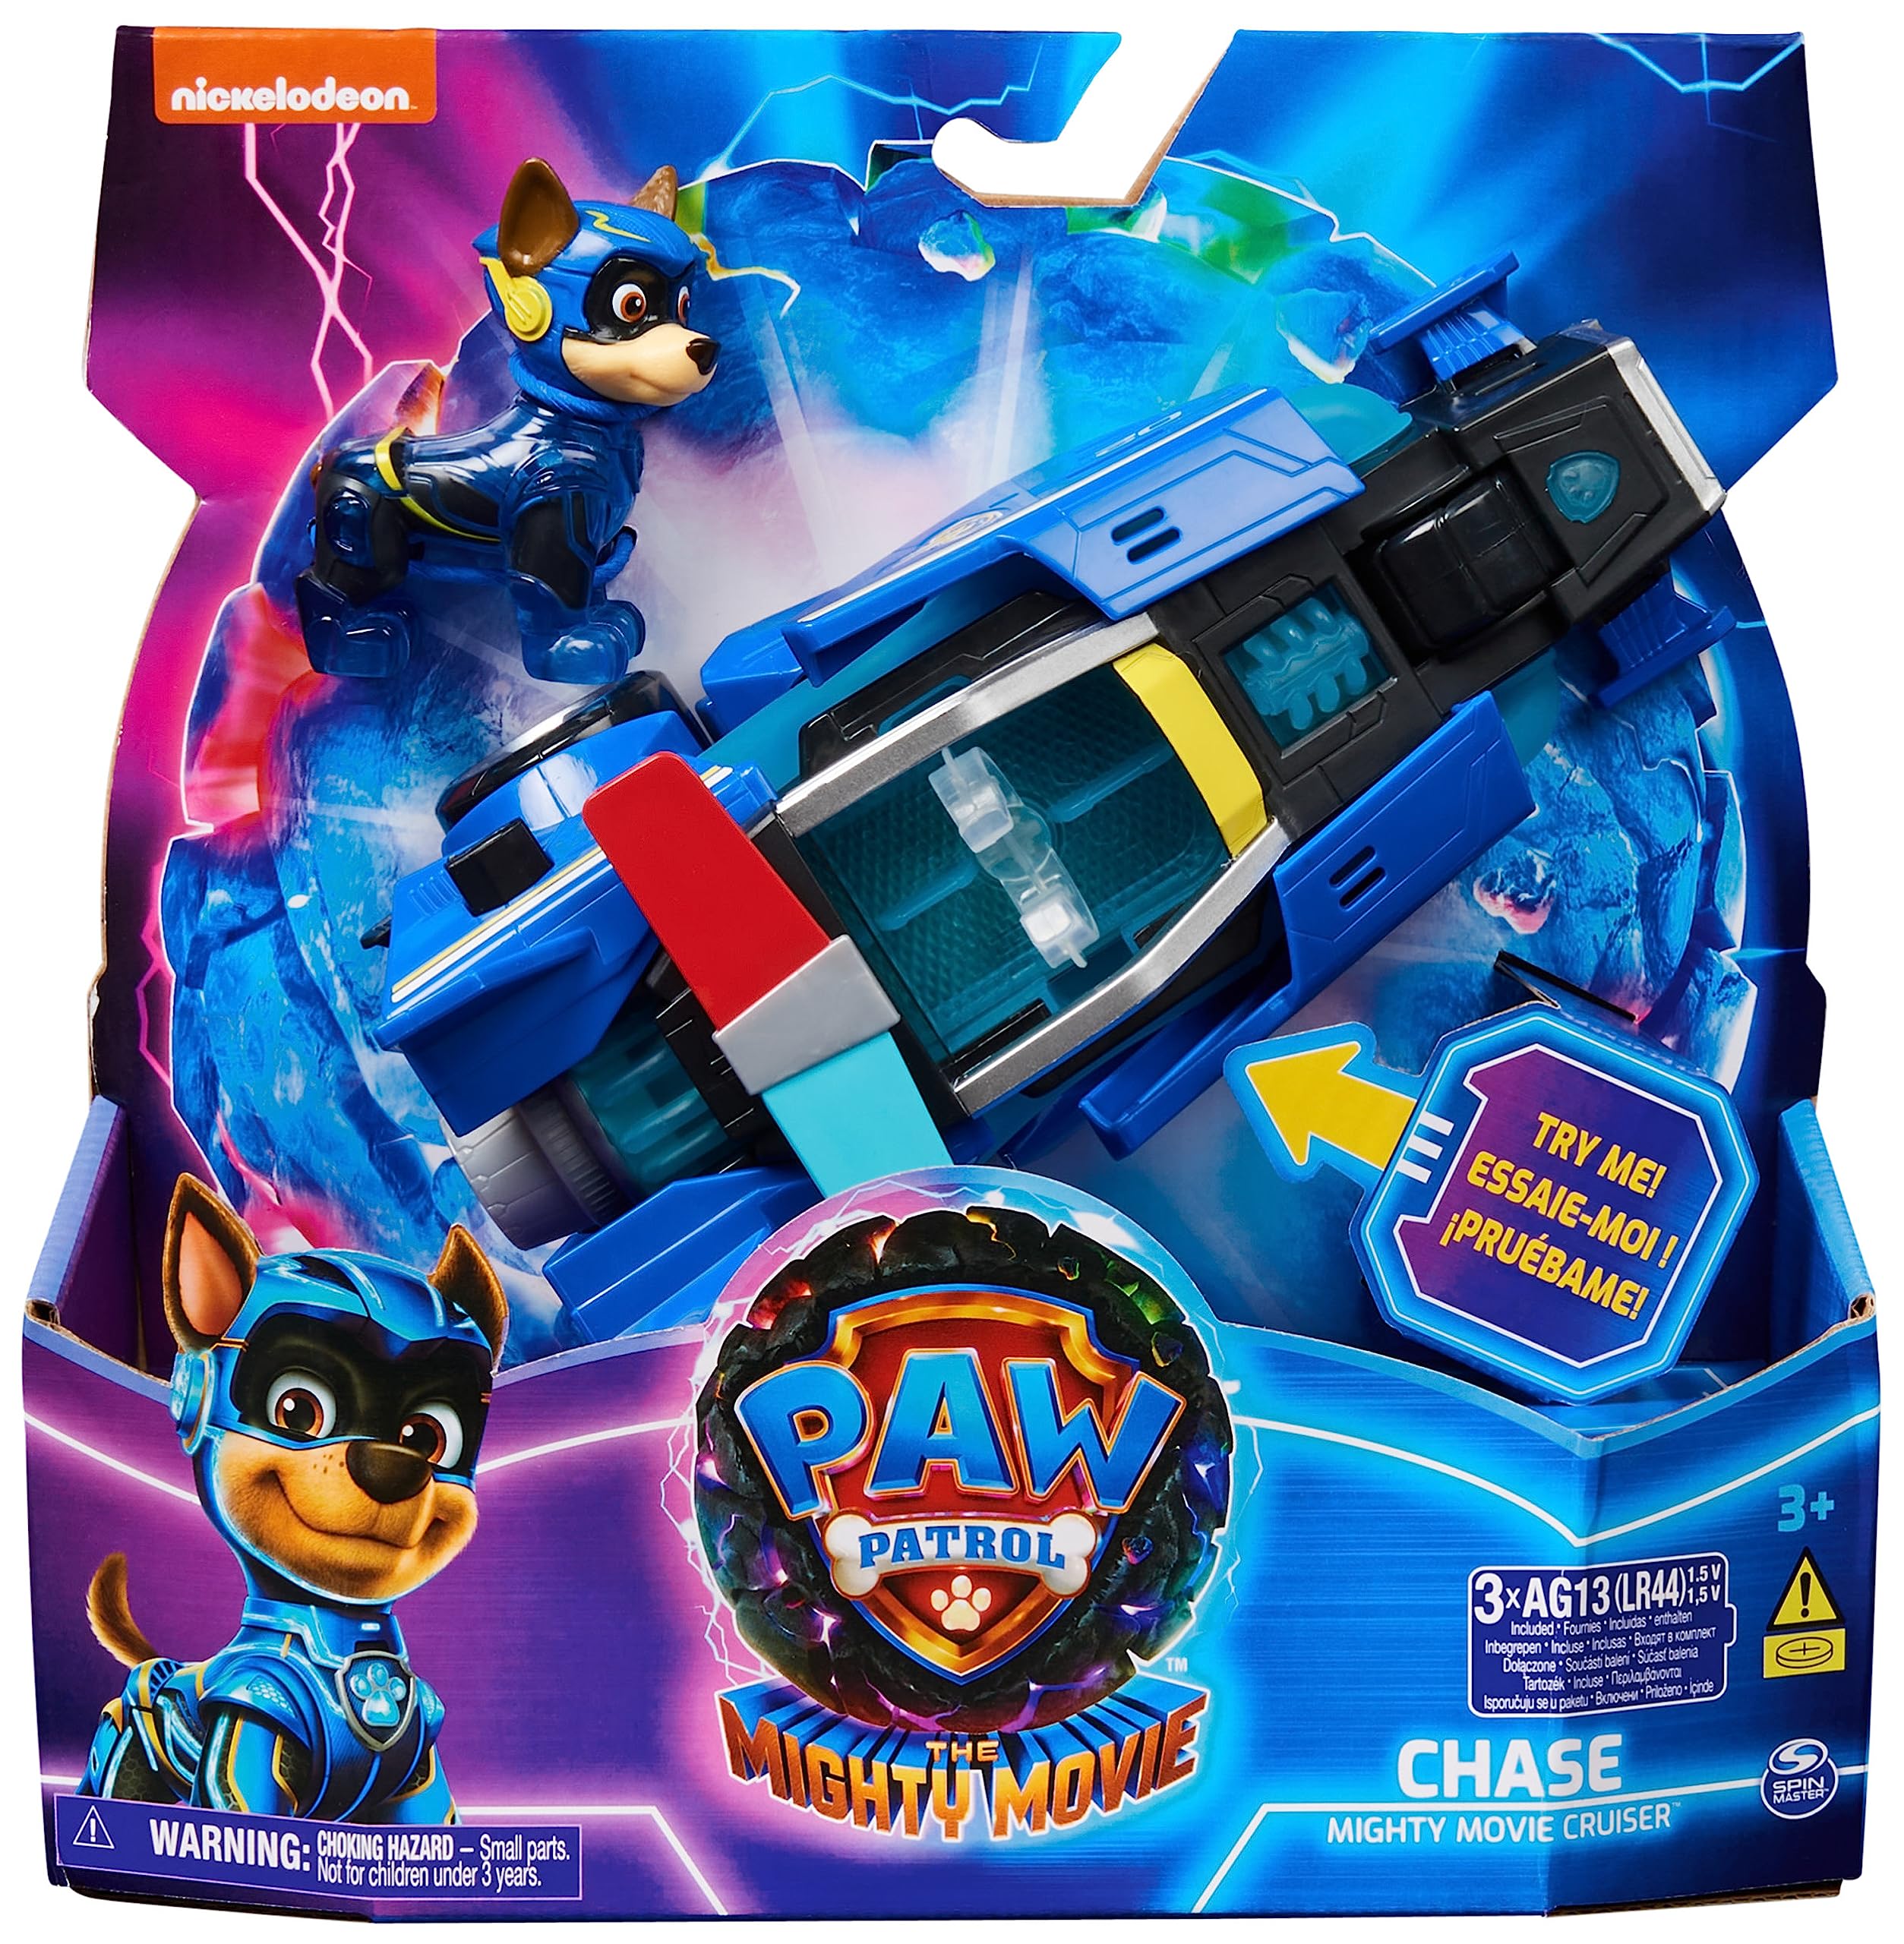 Paw Patrol – The Superfilm – Action Figures and Cars Toys Paw Patrol – Figure Chase Paw Patrol and Toy Car with Lights and Sounds – 6067507 – Toys Children 3 Years +